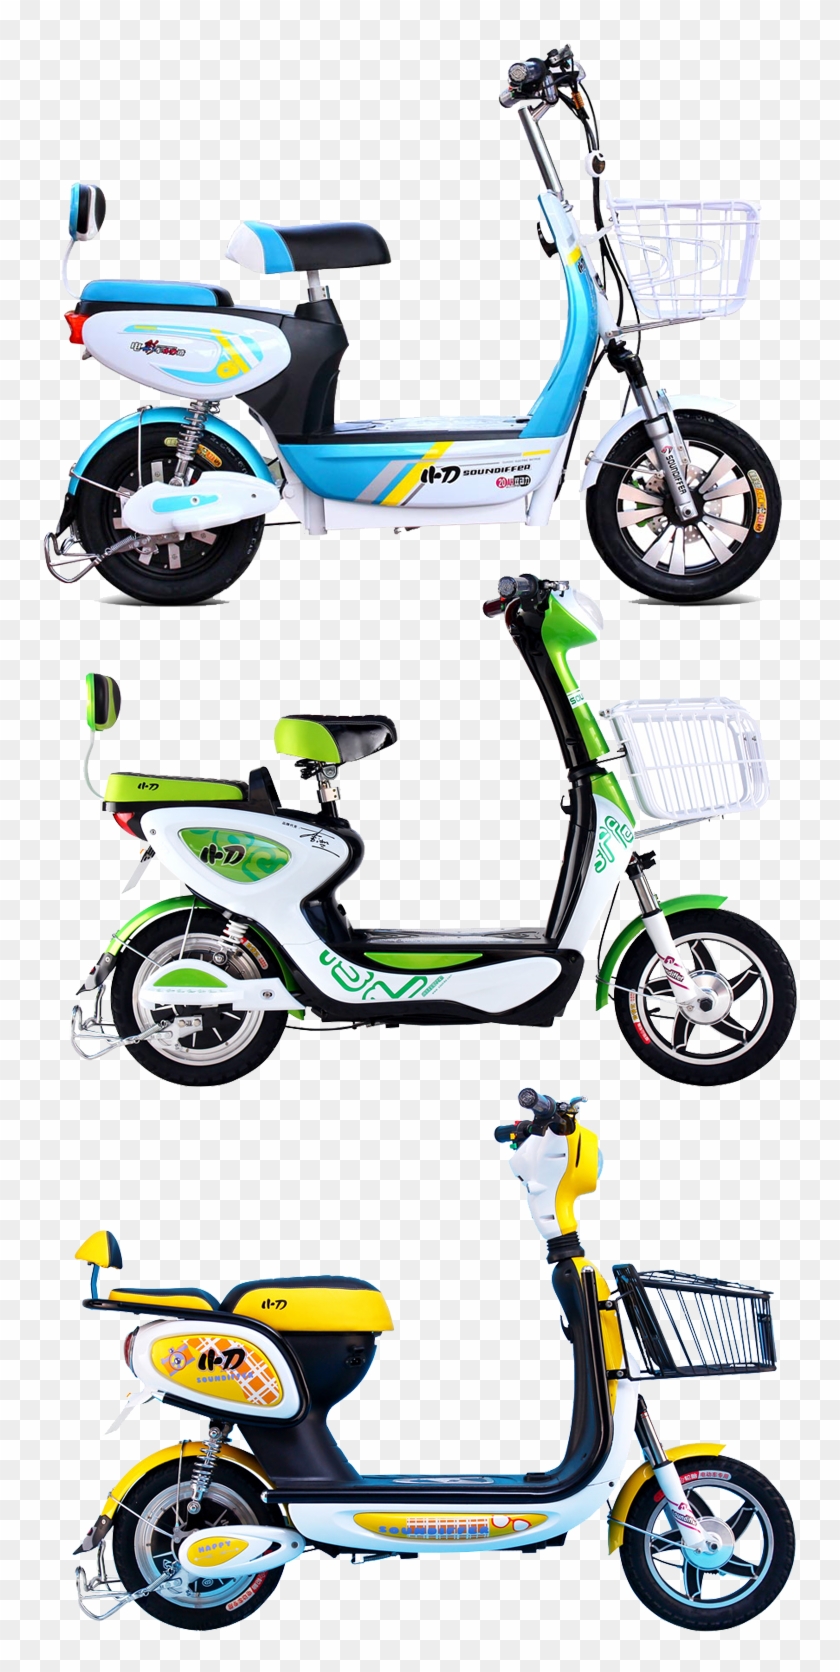 Car Electric Vehicle Knife Game Icon Bicycle Frame - Car Electric Vehicle Knife Game Icon Bicycle Frame #784556